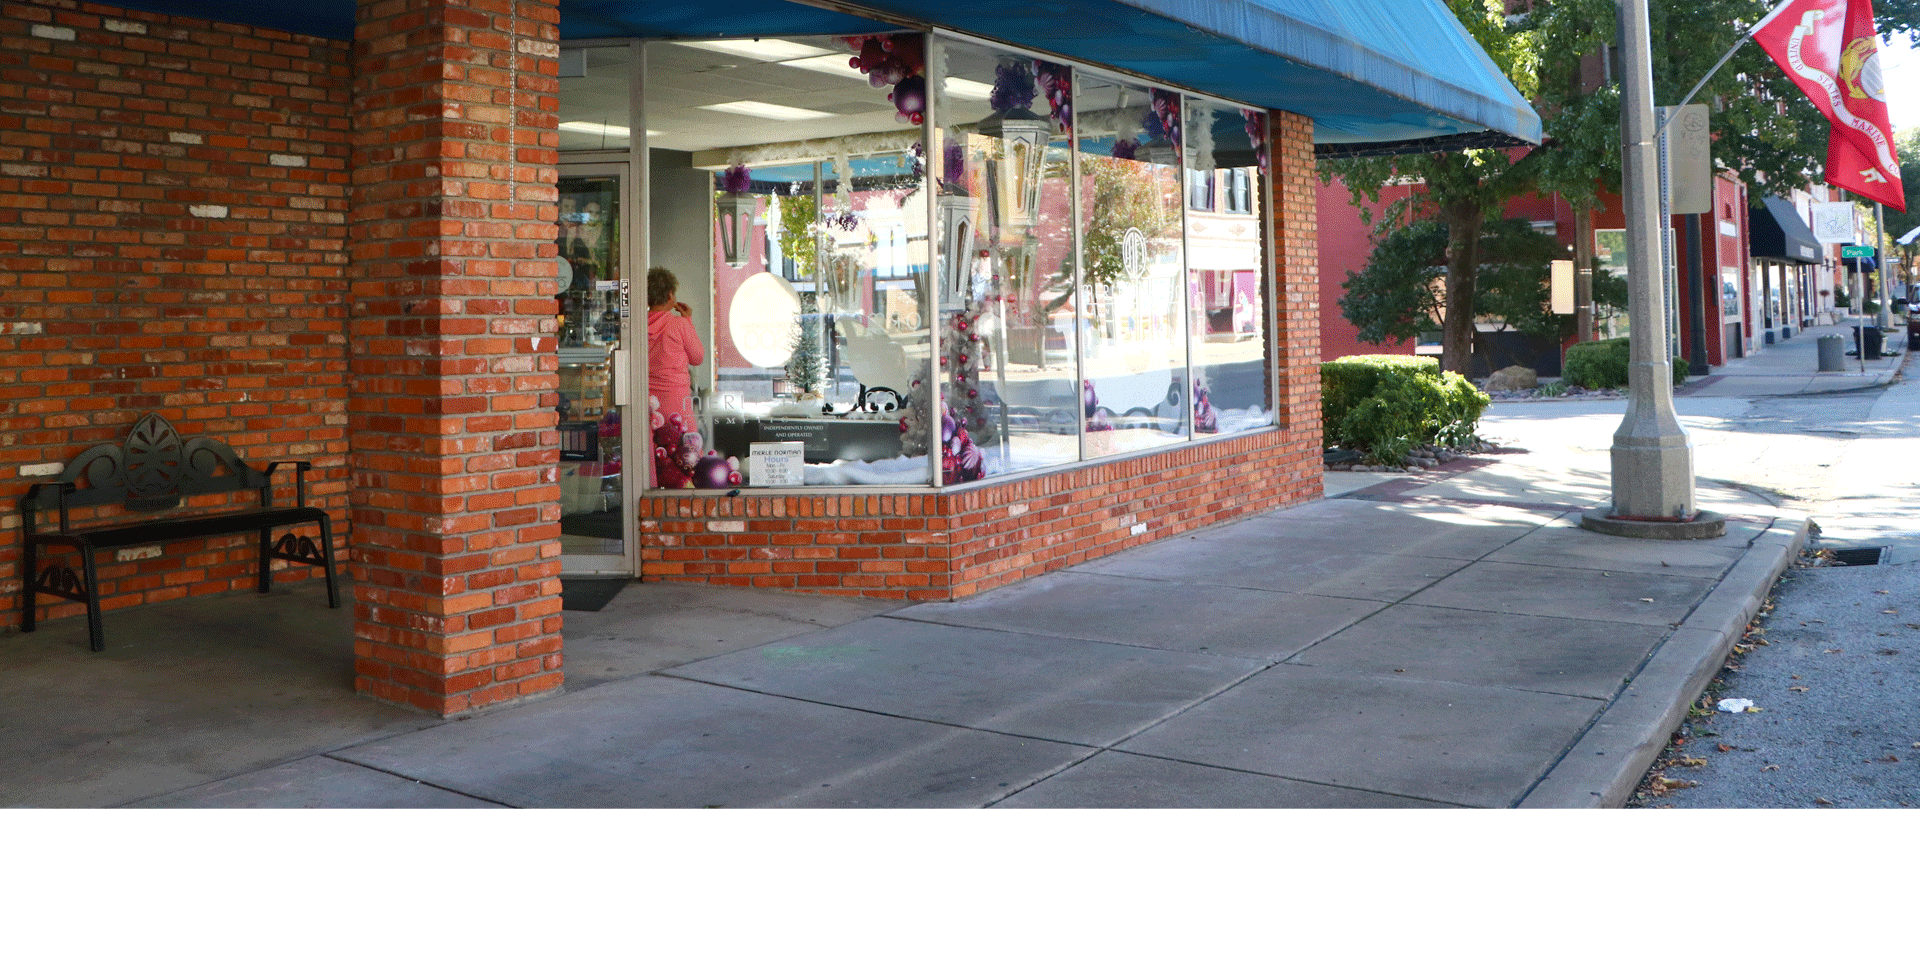 Visit Merle Norman Cosmetics and Day Spa on historic Route 66!